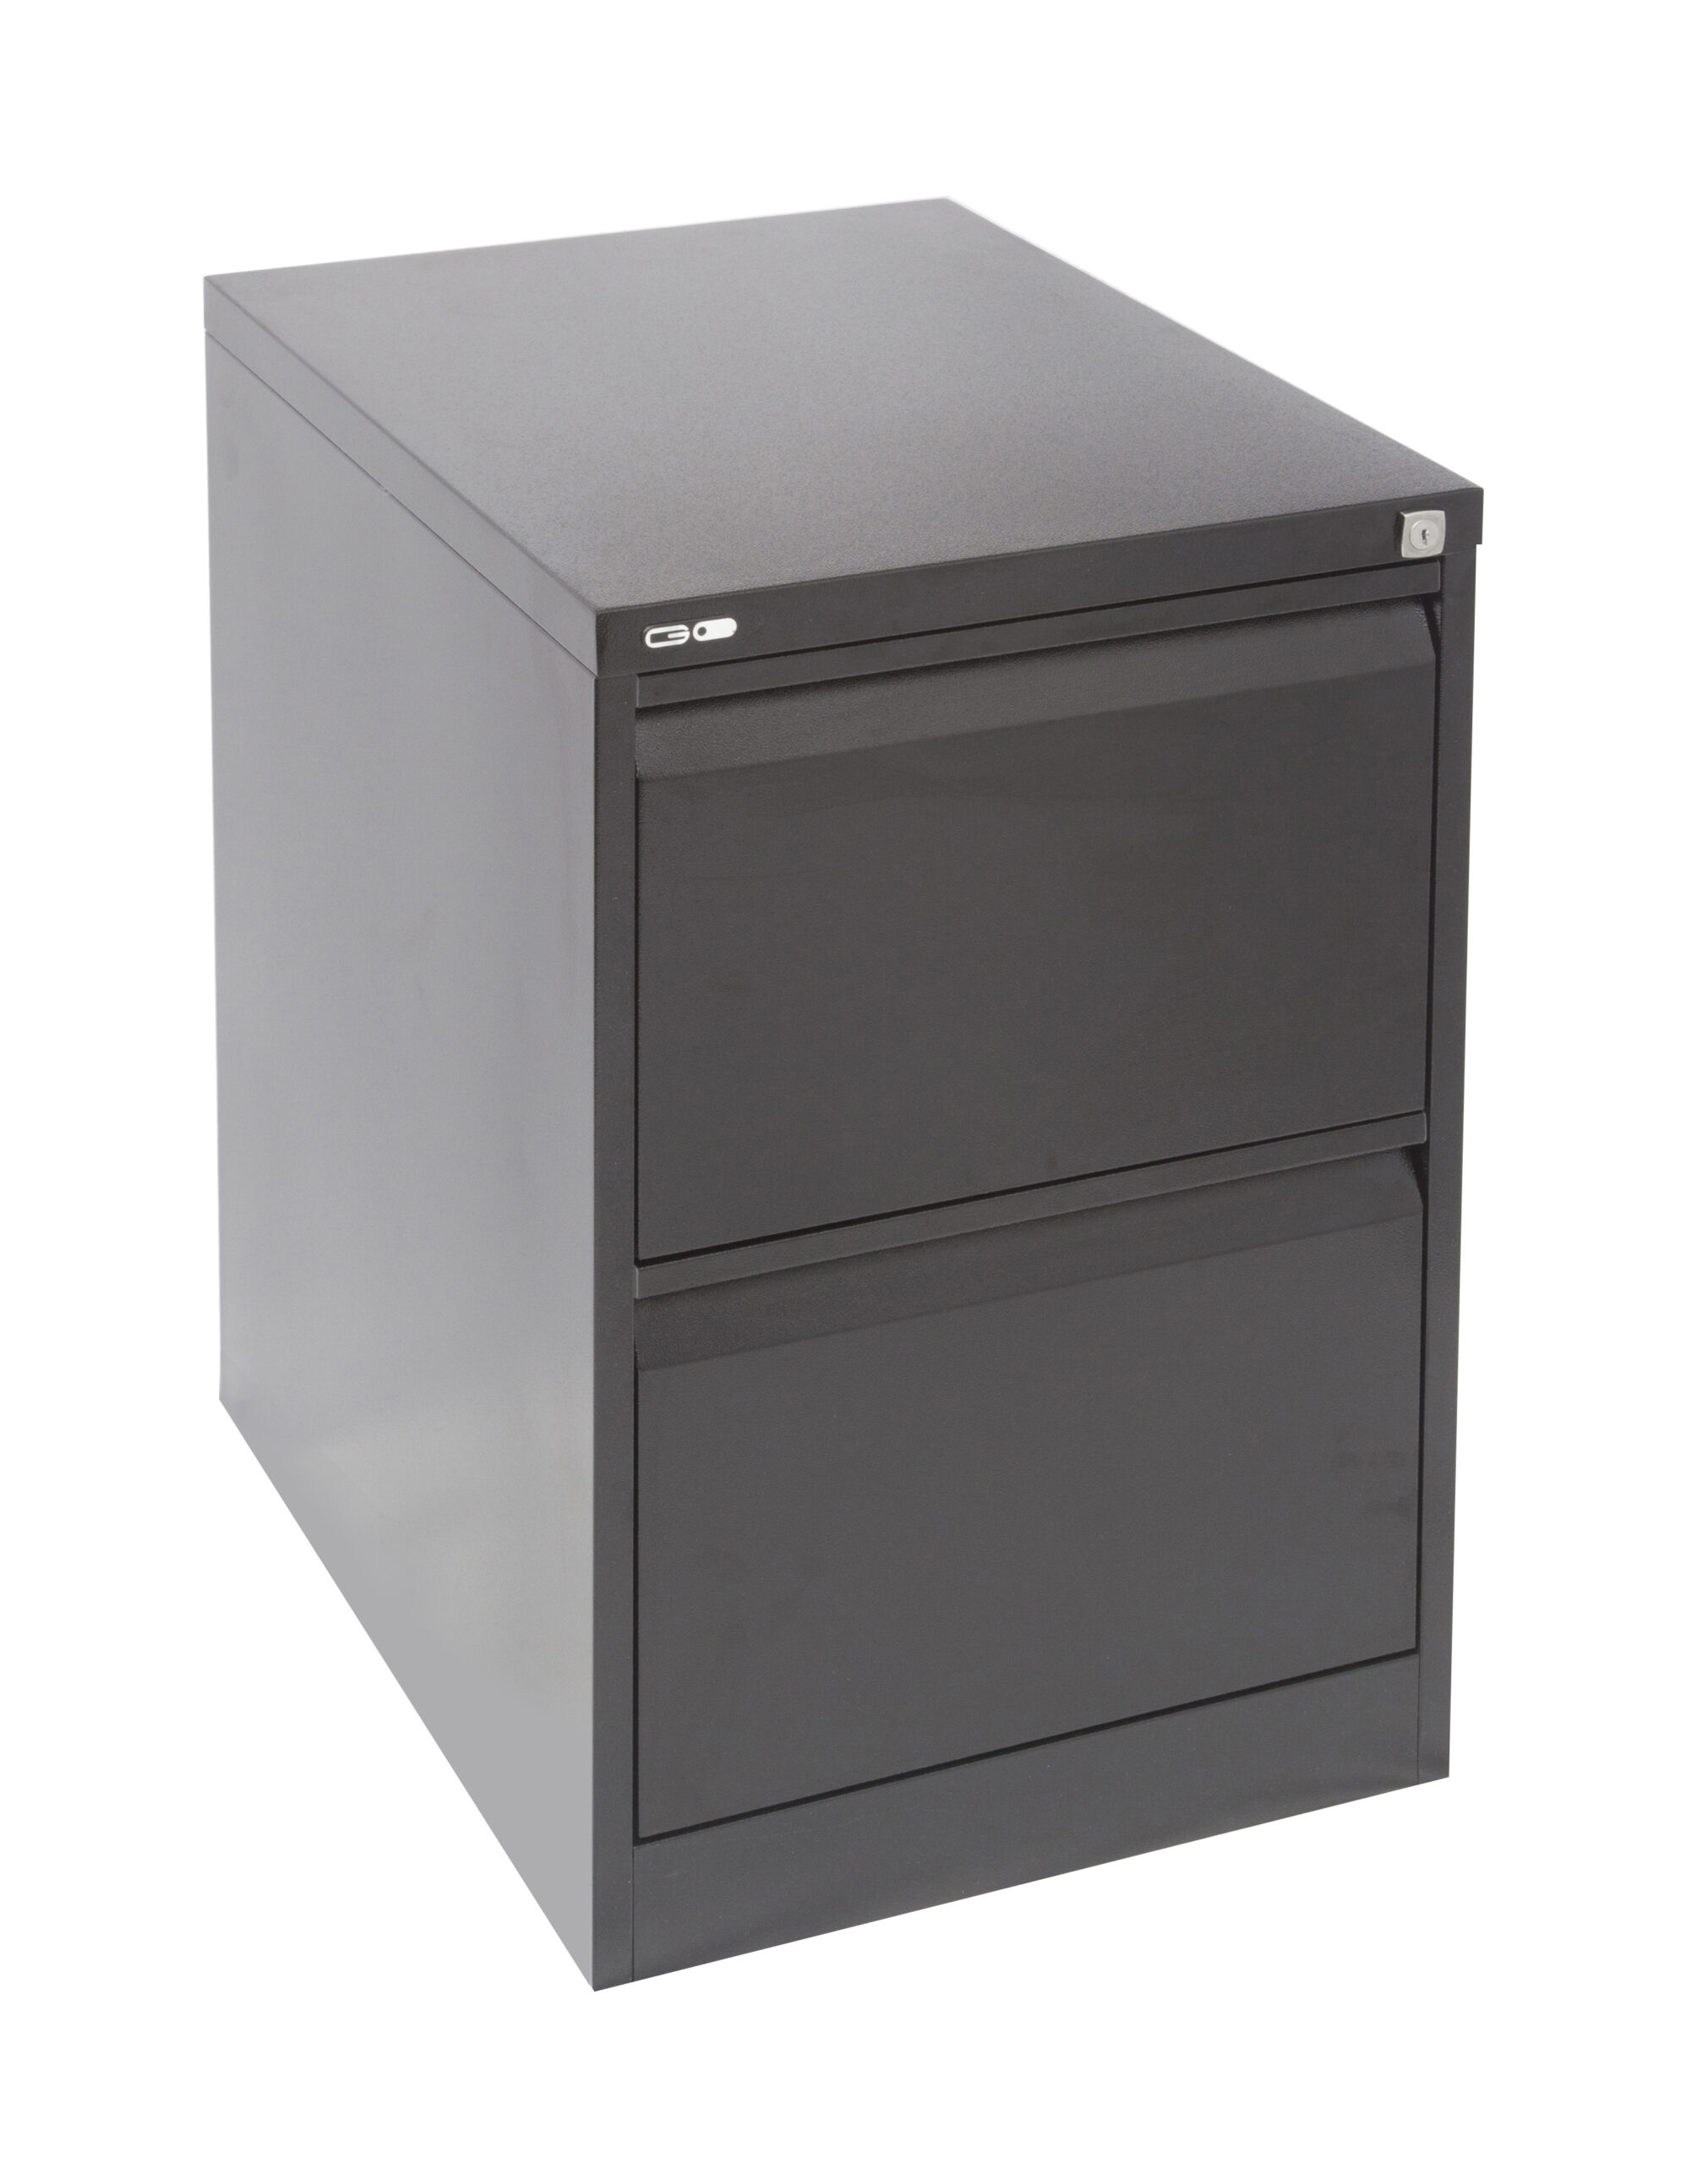 GO Vertical Filing Cabinets (460W x 1016H x 620D)